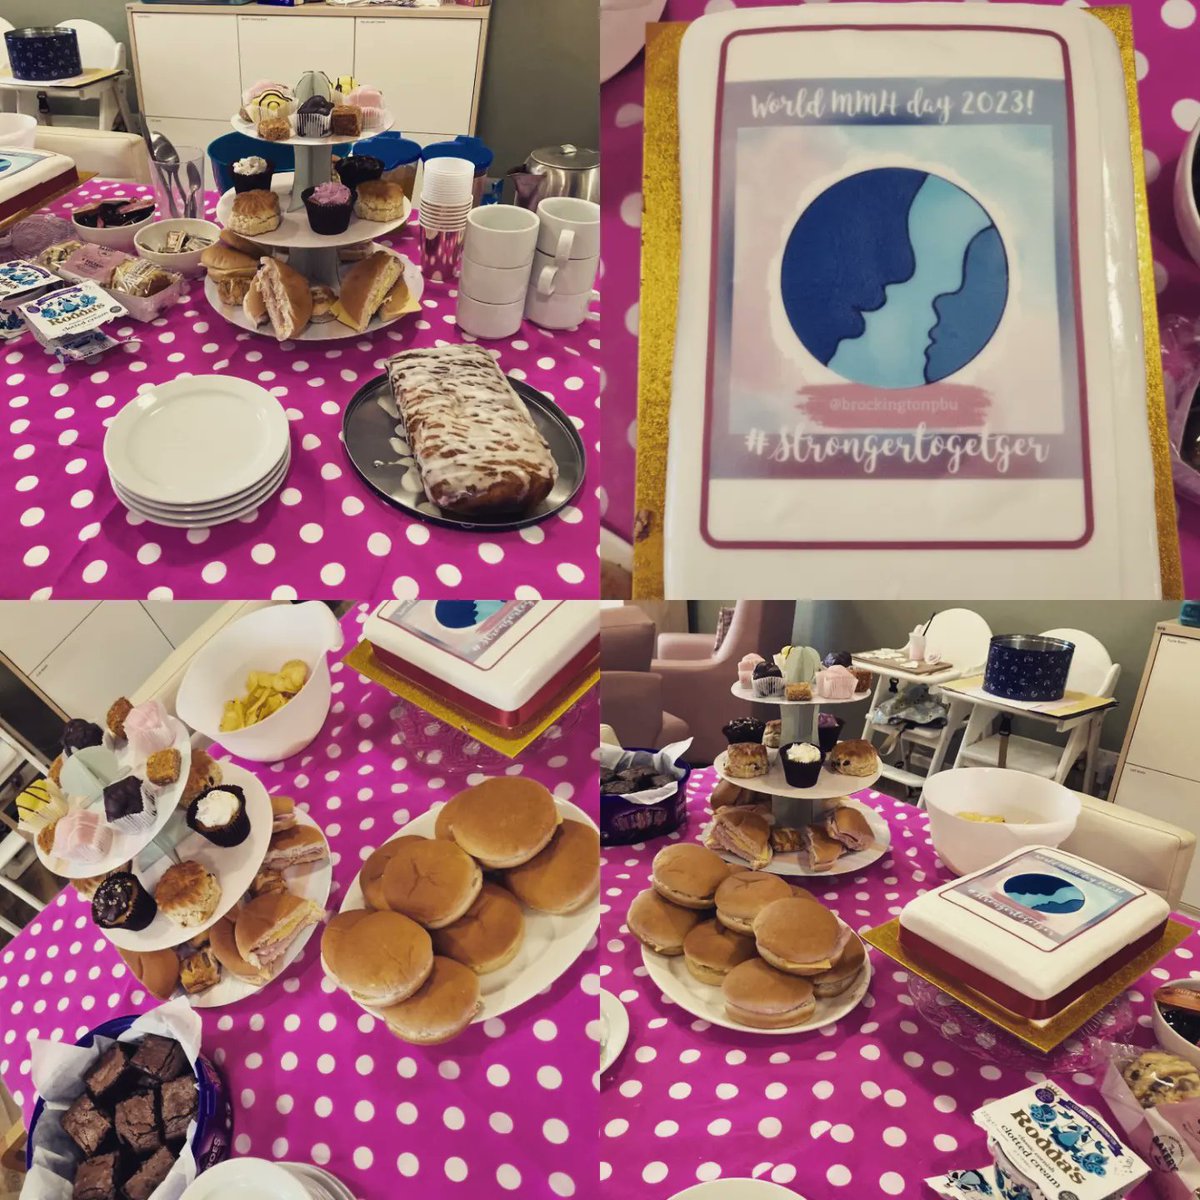 Today we have celebrated Maternal Mental Health Awareness Day by getting together for afternoon tea 🧁🫖
👀 Can you spot our very special cake 💜 #brockingtonpbu #perinatalmentalhealth #maternalmentalhealth #maternalmentalhealthawarenessweek #strongertogether